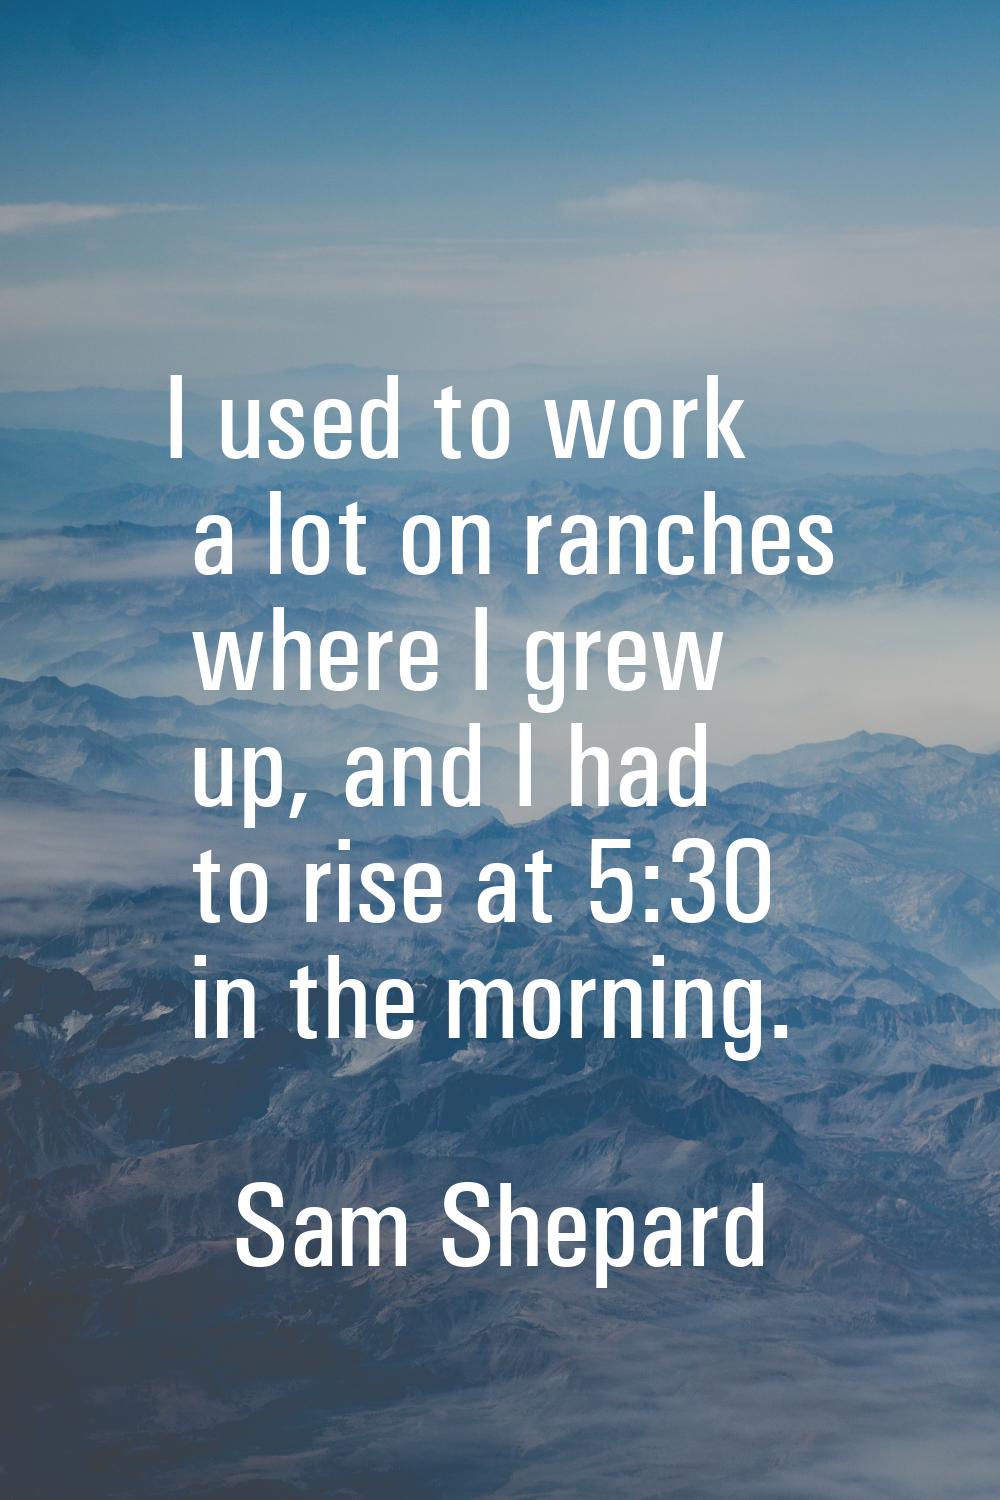 I used to work a lot on ranches where I grew up, and I had to rise at 5:30 in the morning.